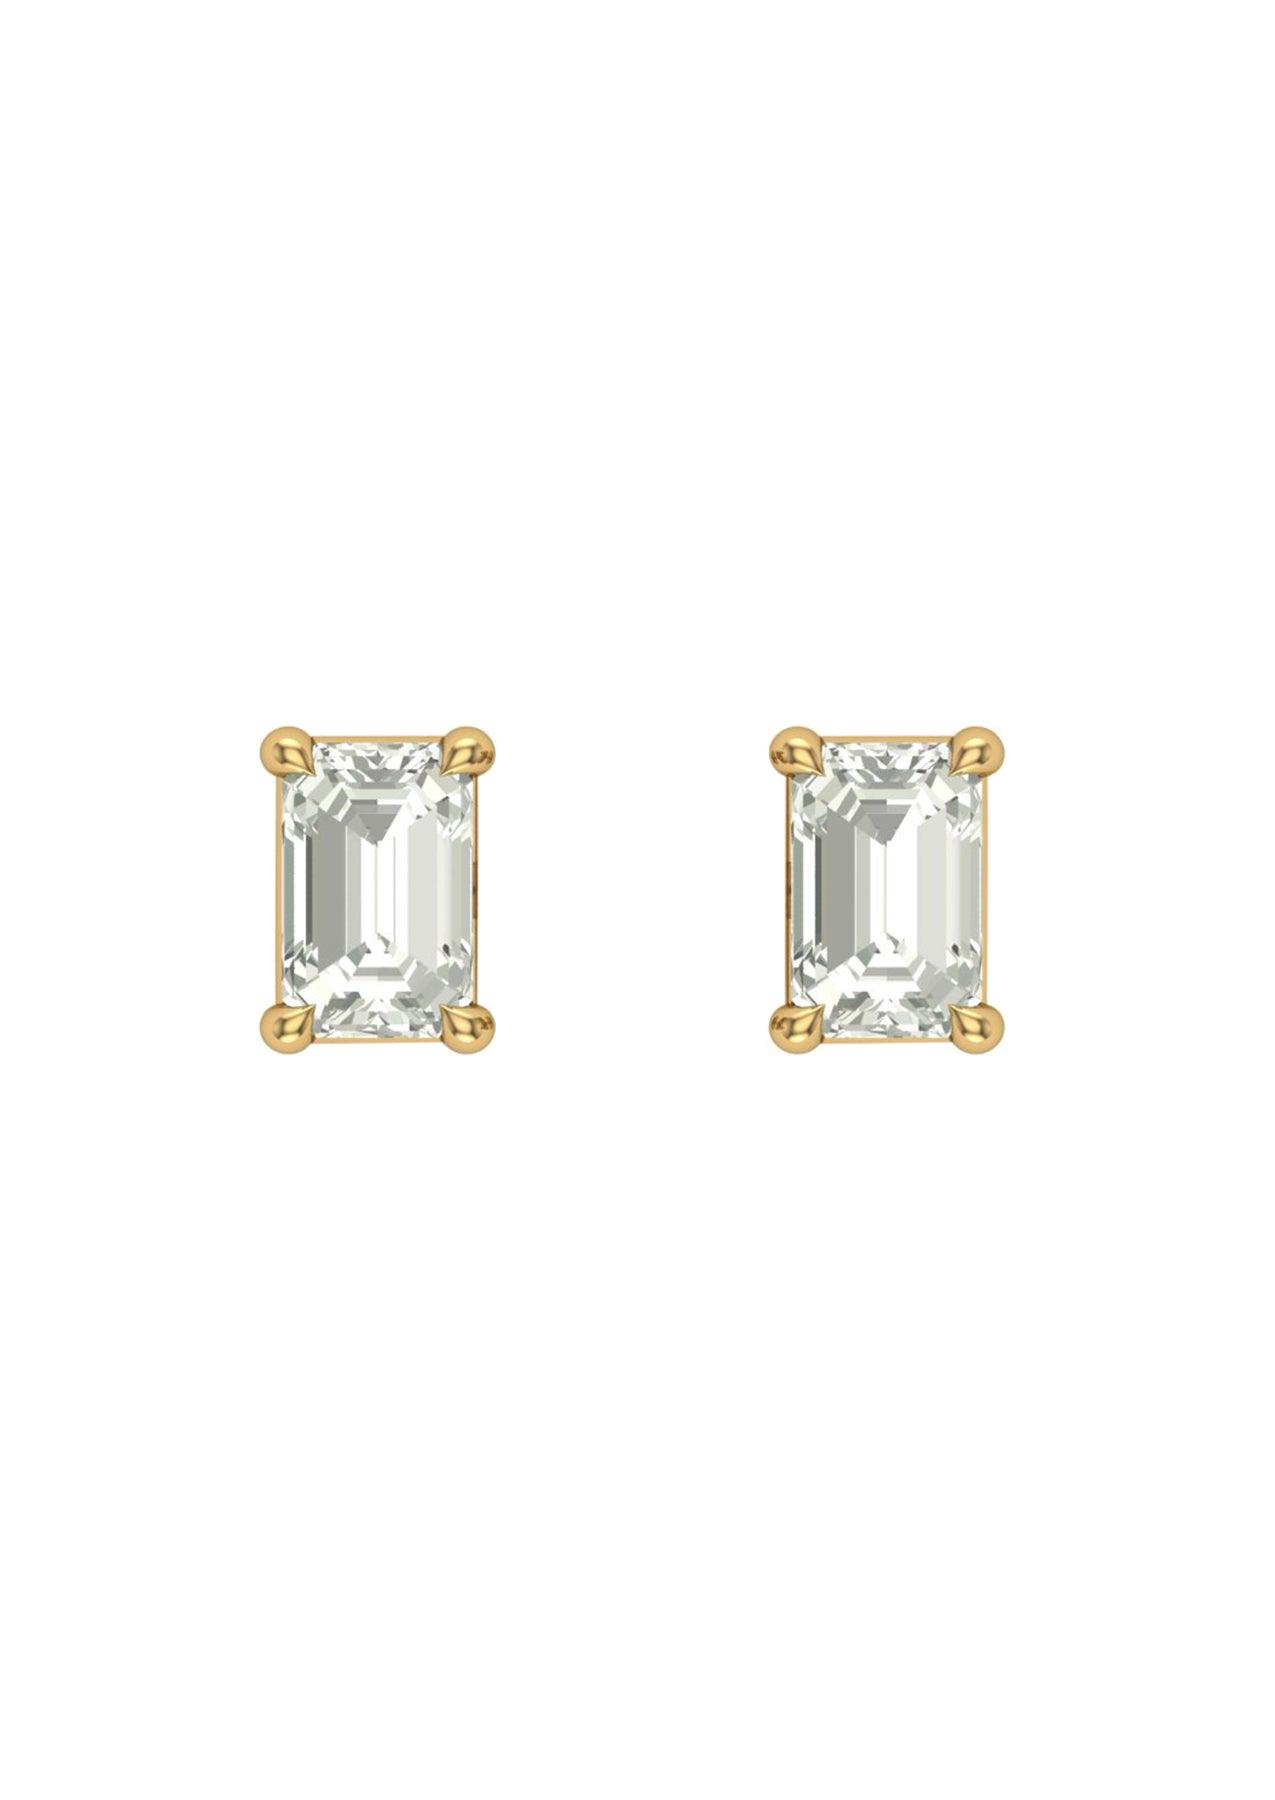 The Poe Yellow Gold 0.6ct Emerald Cultured Diamond Earrings